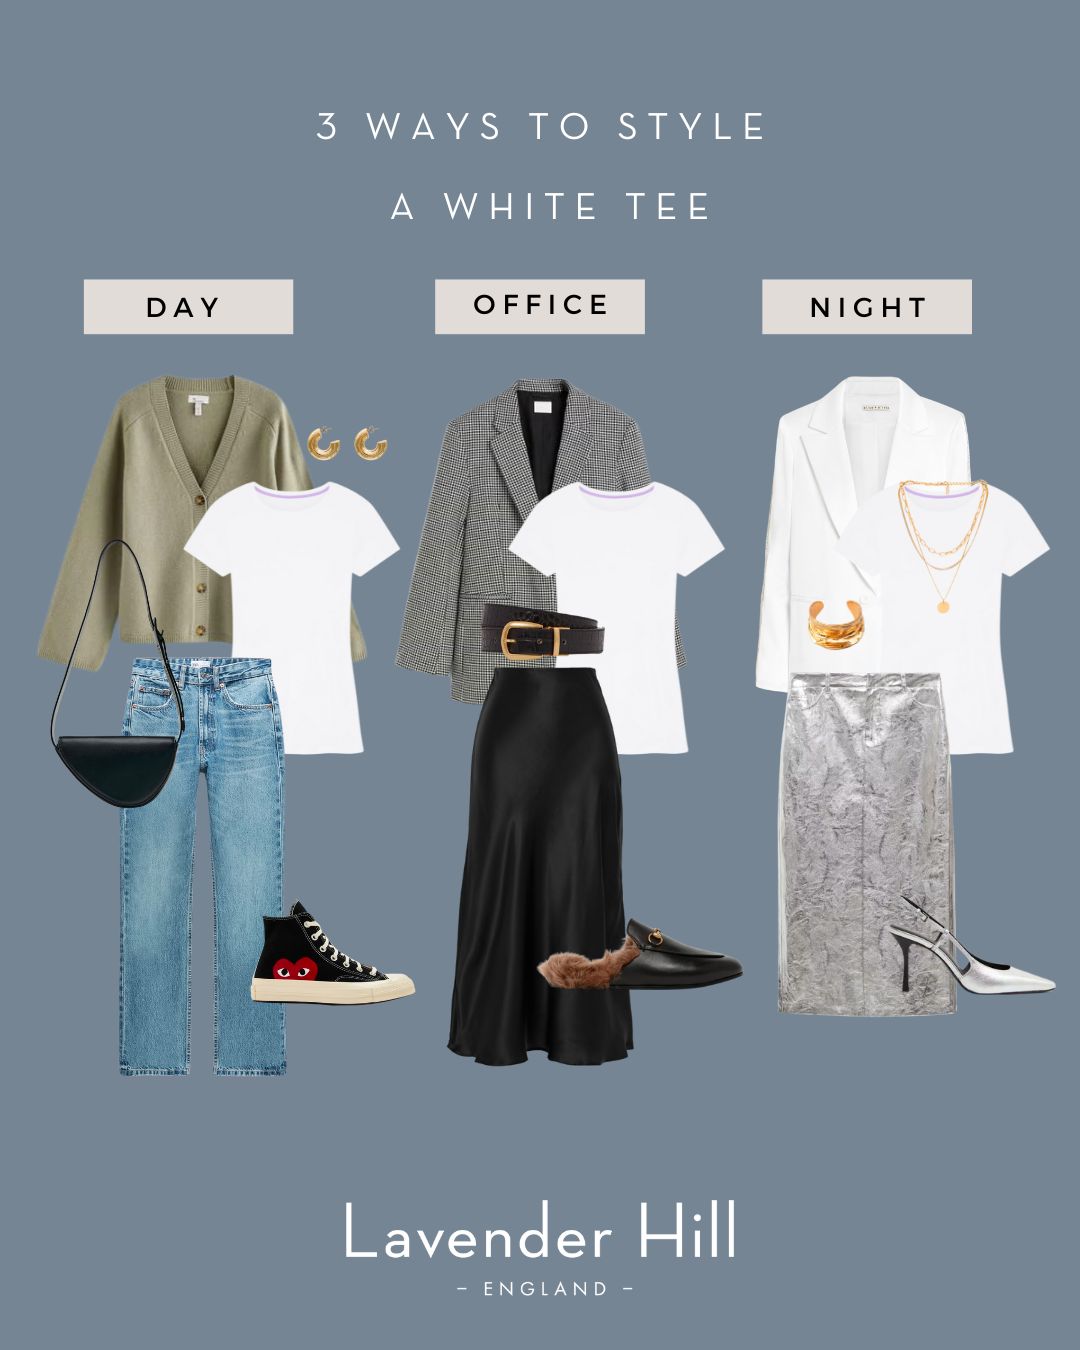 3 ways to style a white t-shirt